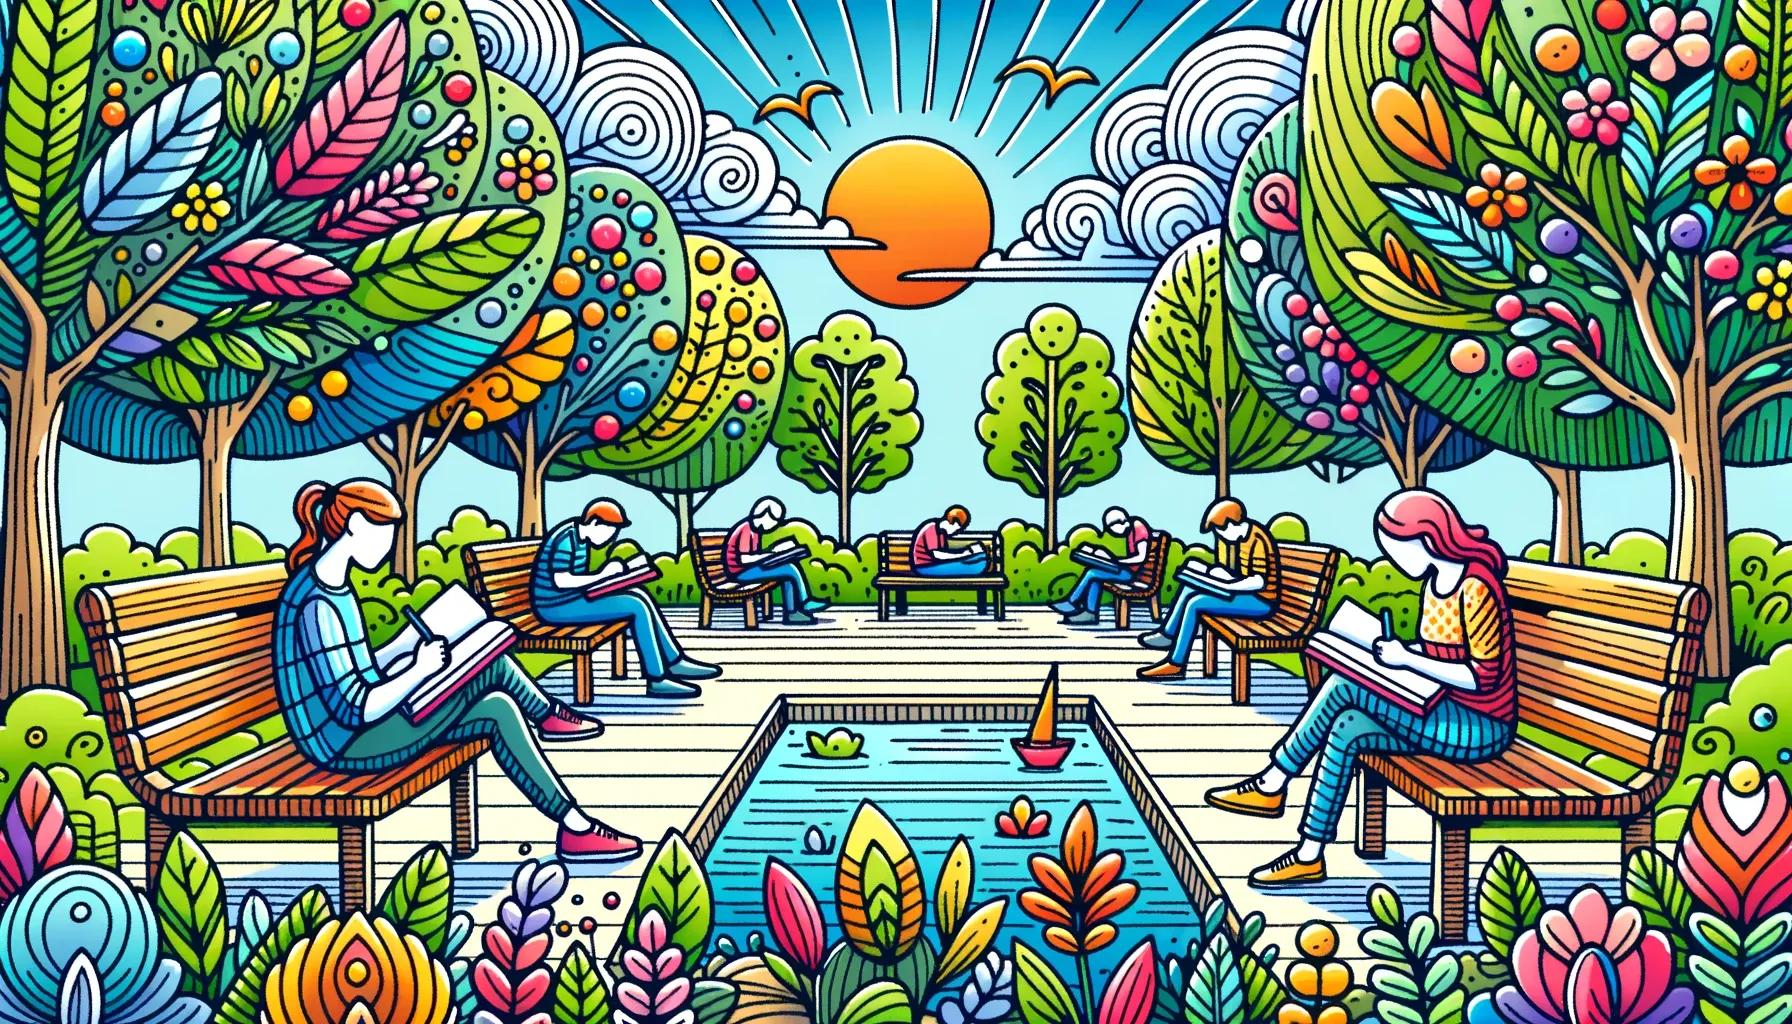 Wide illustration in a doodle style of a tranquil garden where adults are seated on benches, engrossed in their coloring books. The atmosphere is peaceful with bright, playful colors.